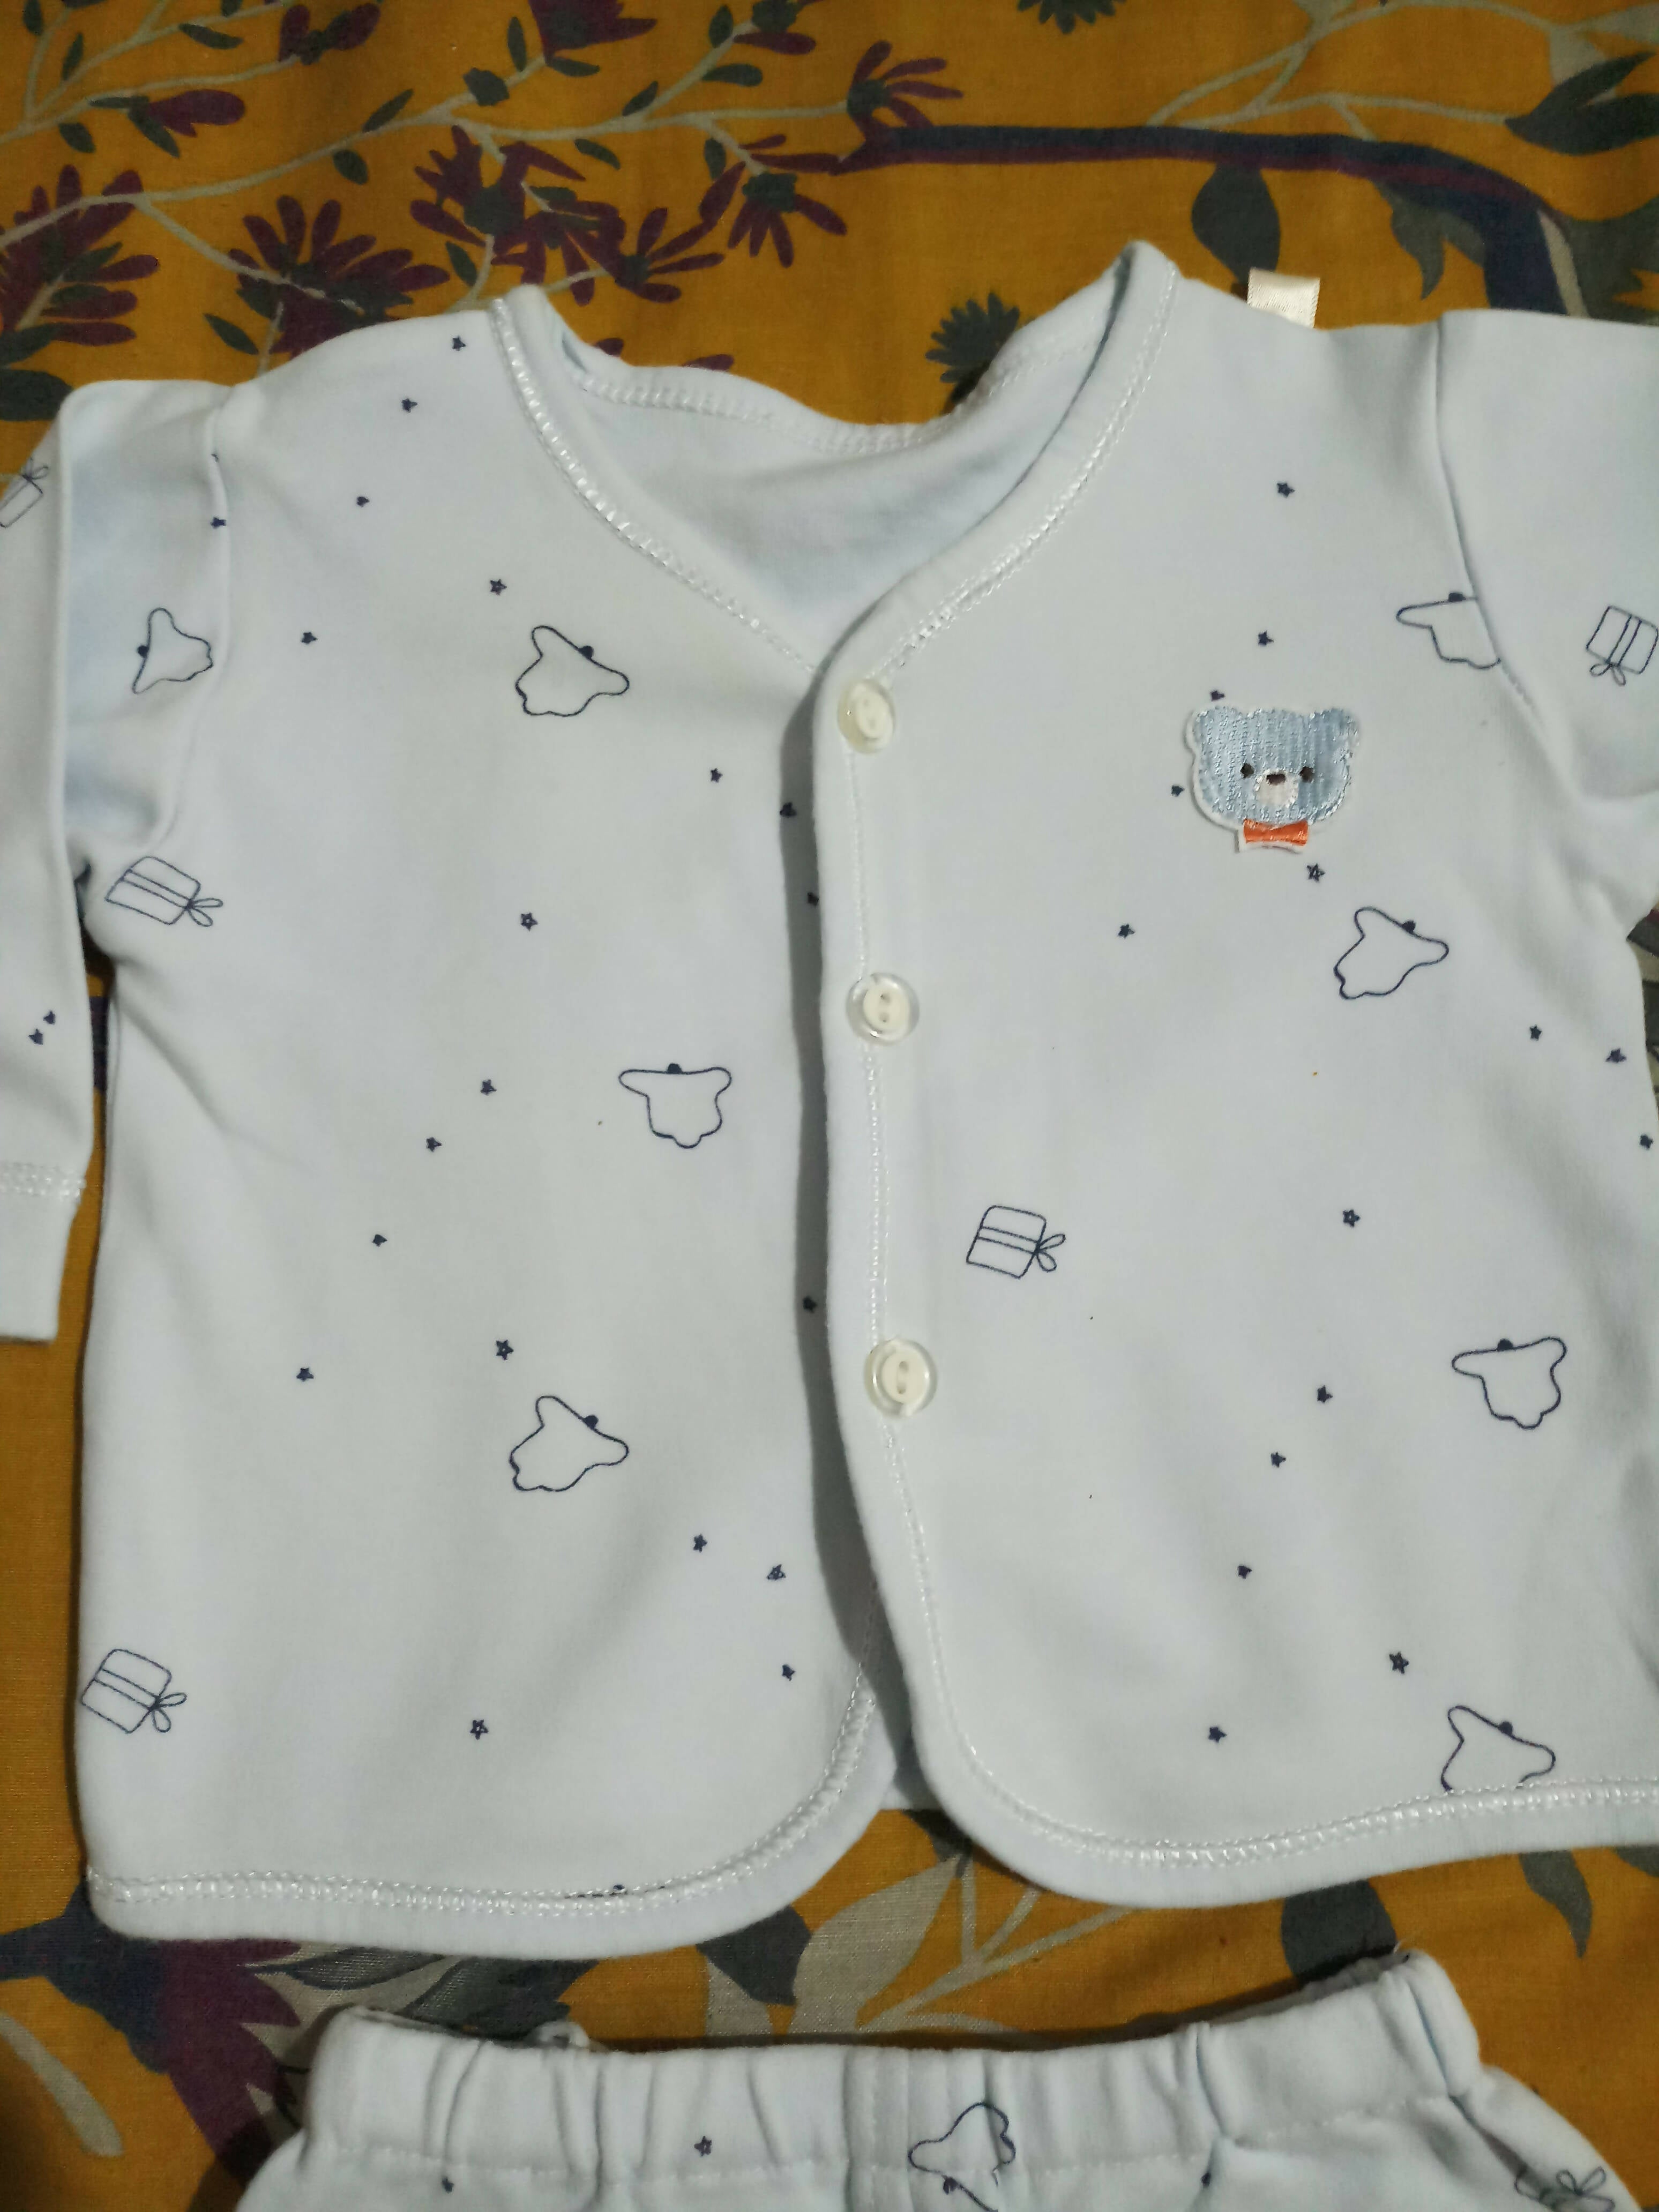 Baby Blue Suit | Kids Winter | Size:0-3 months | Worn Once